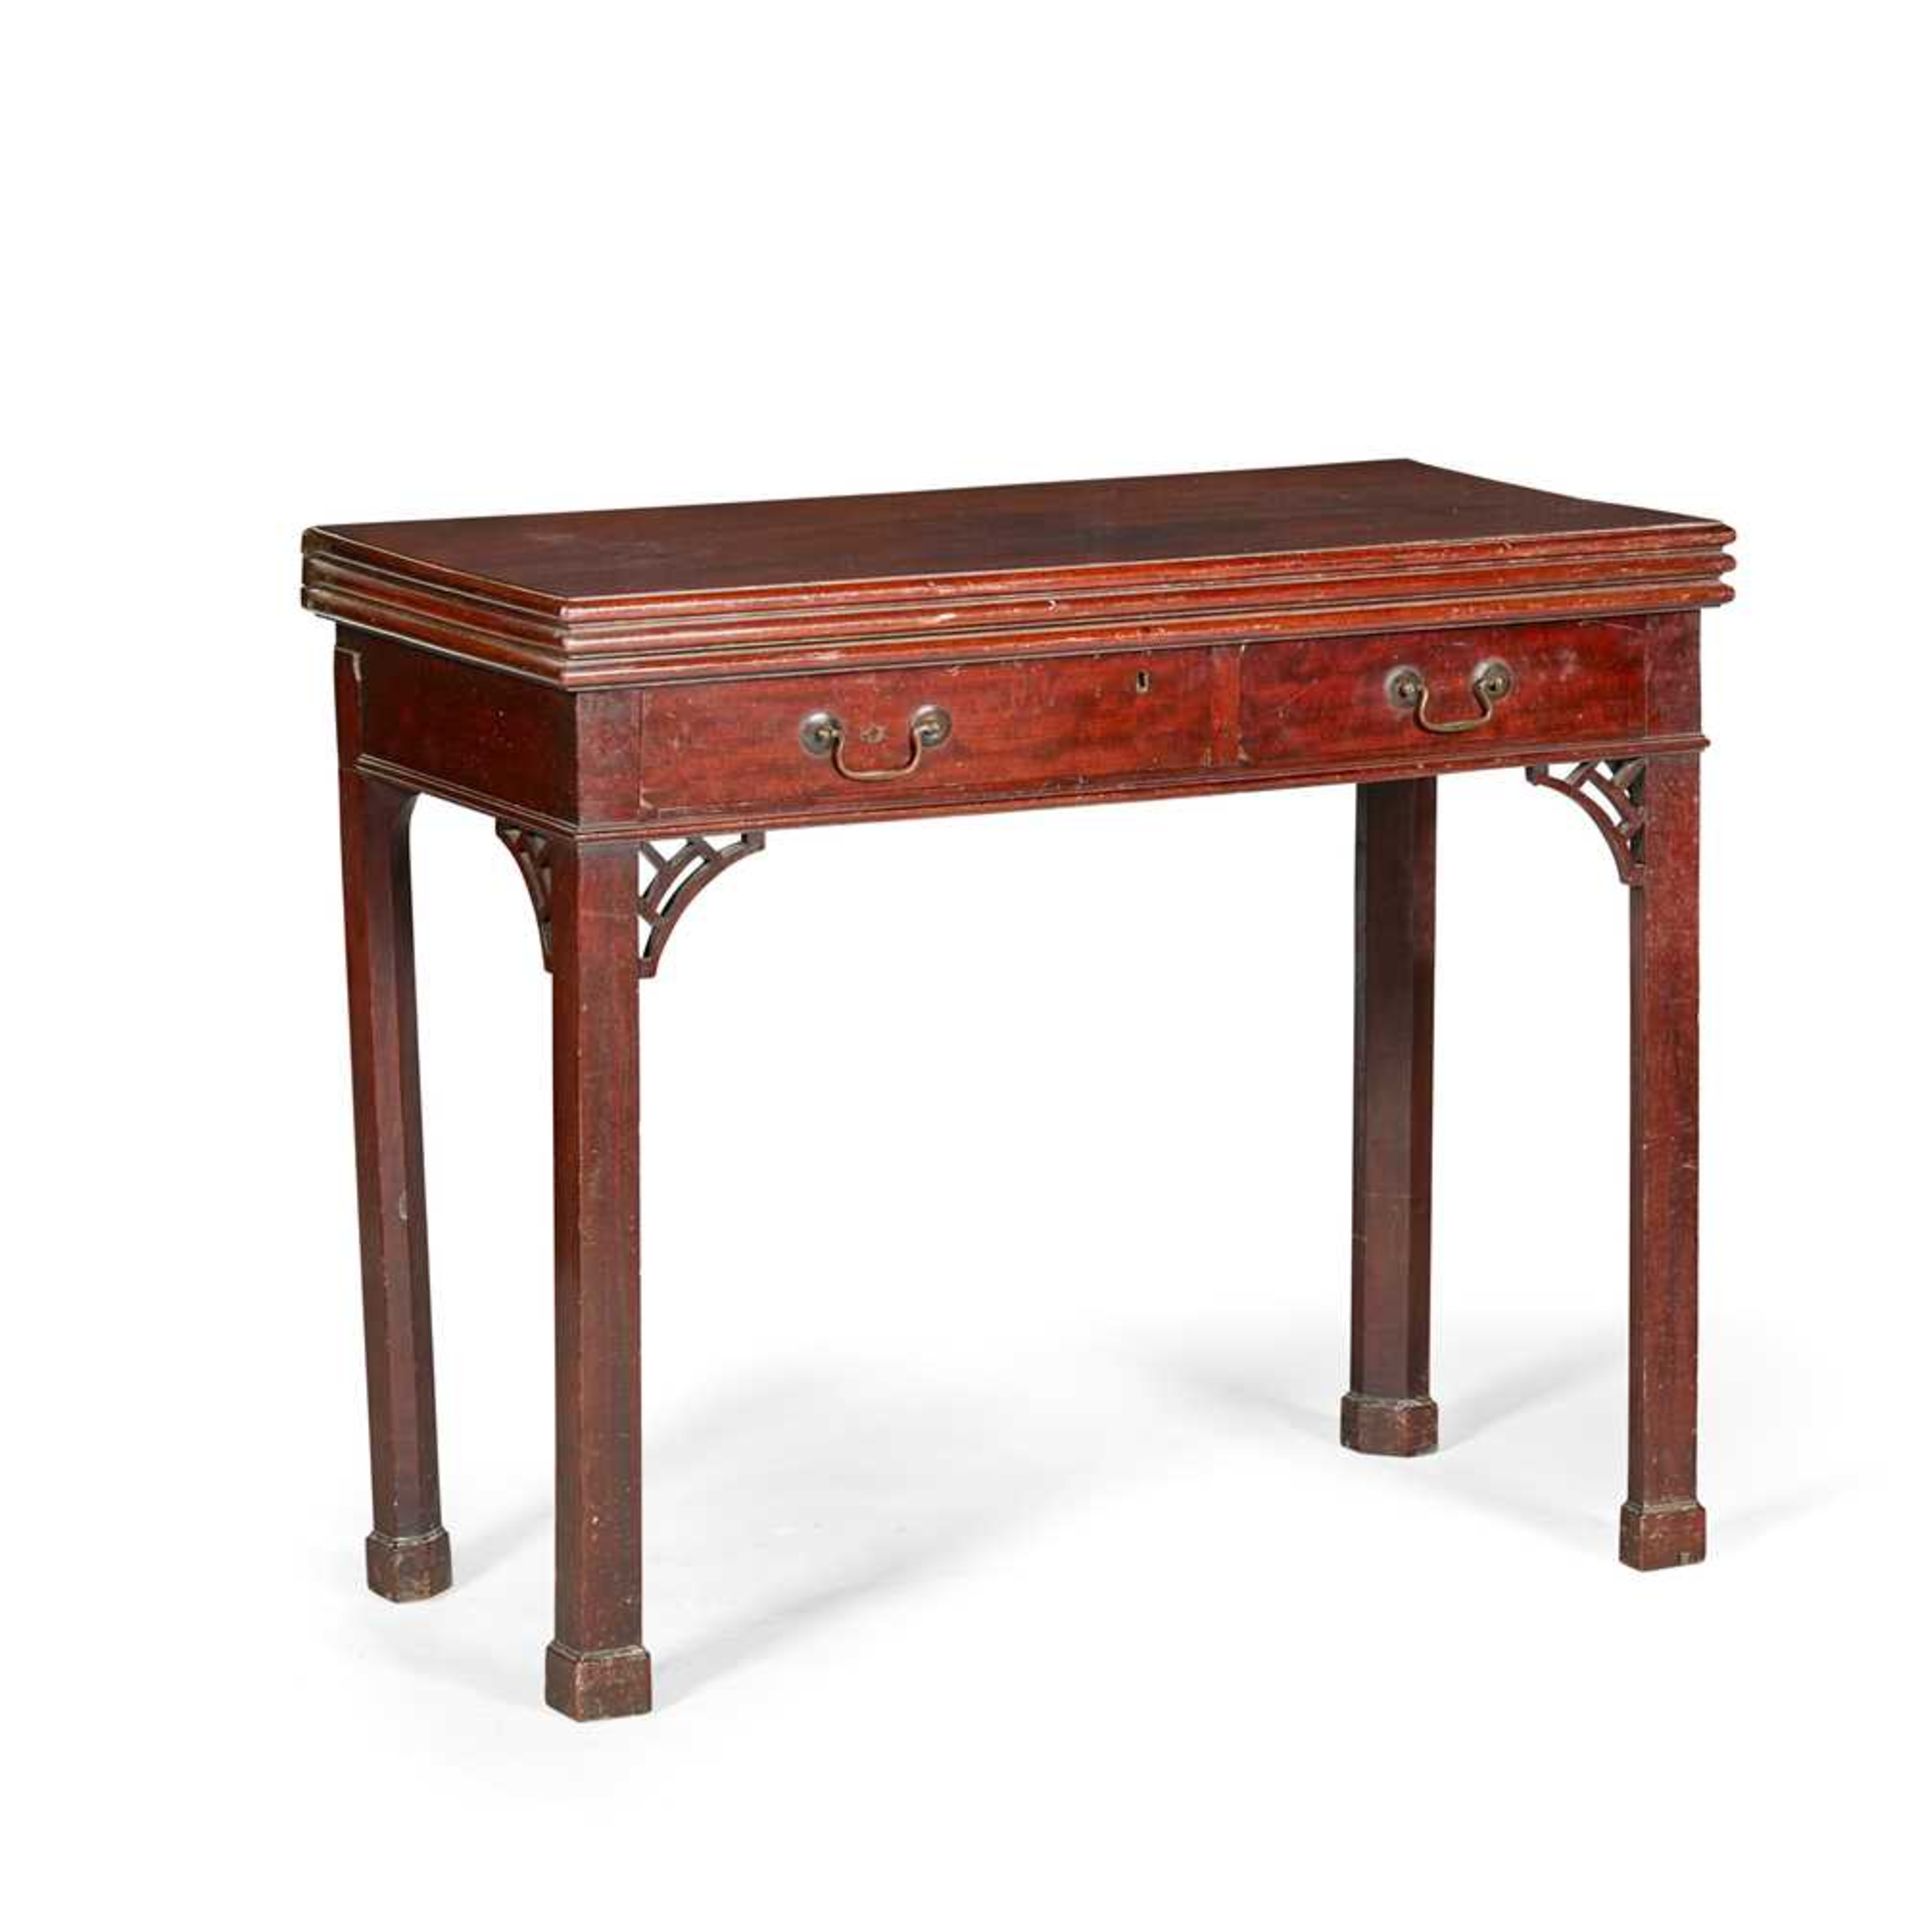 GEORGE II MAHOGANY GAMES AND CARD TABLE MID 18TH CENTURY